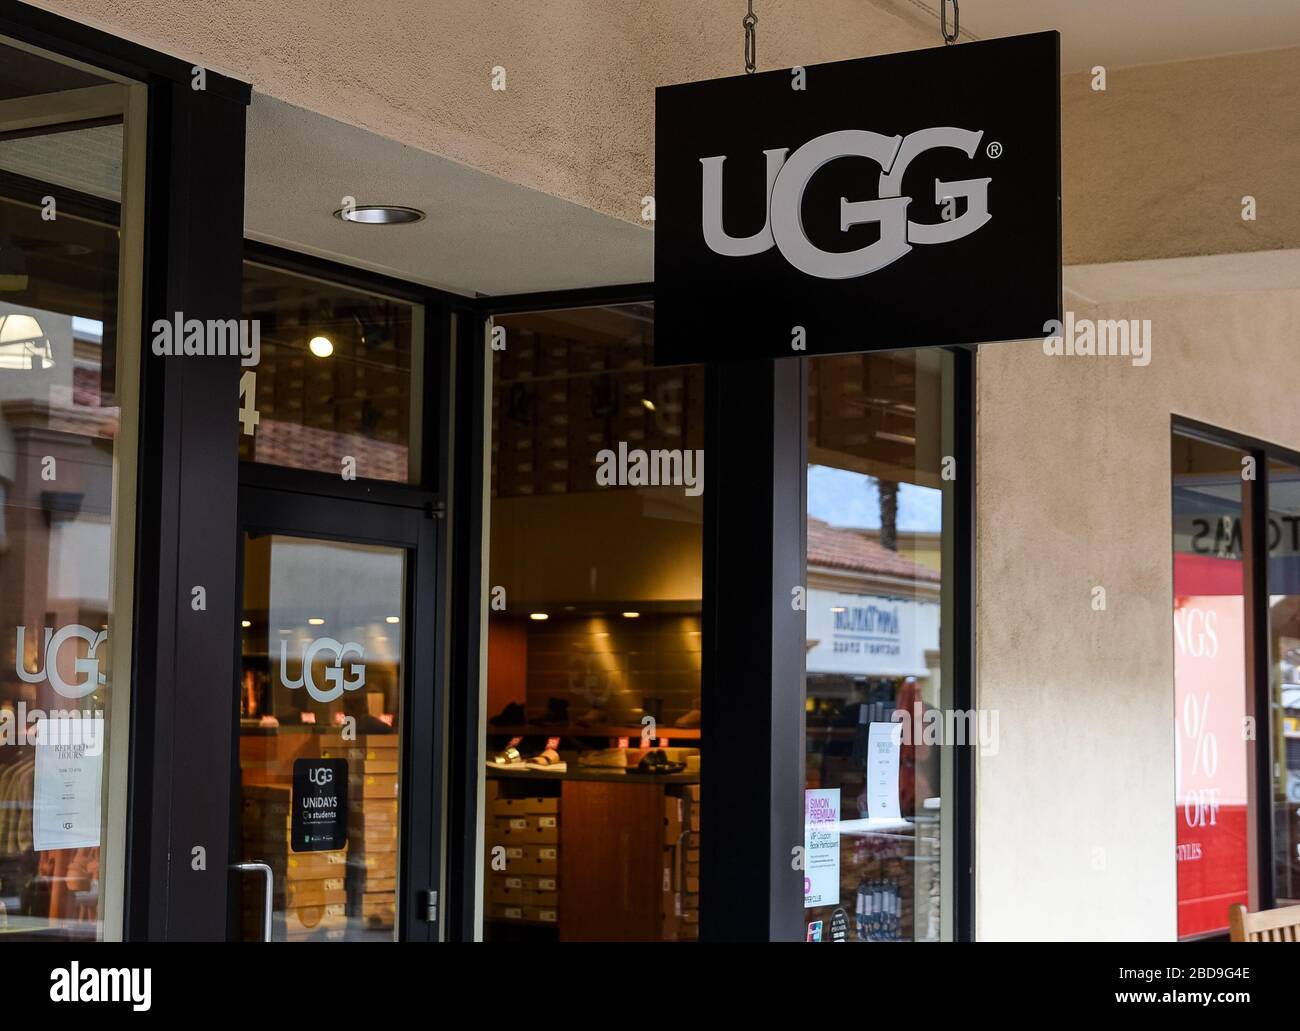 ugg store outlet mall